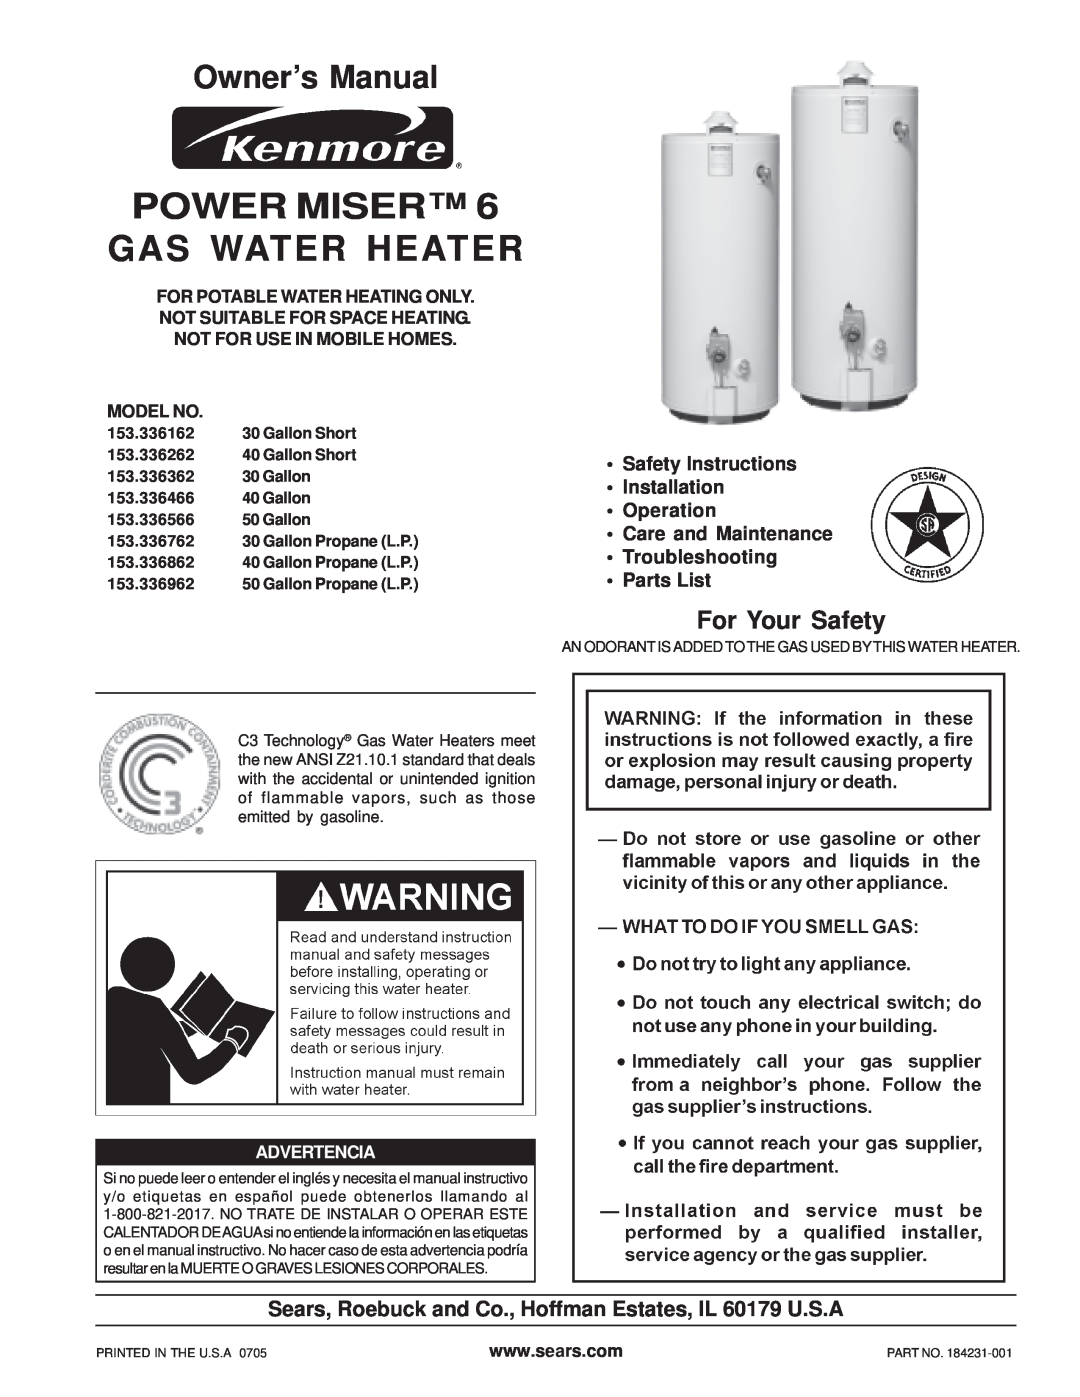 Sears 153.336162 owner manual For Your Safety, Power Miser Gas Water Heater, Owner’s Manual, Troubleshooting Parts List 